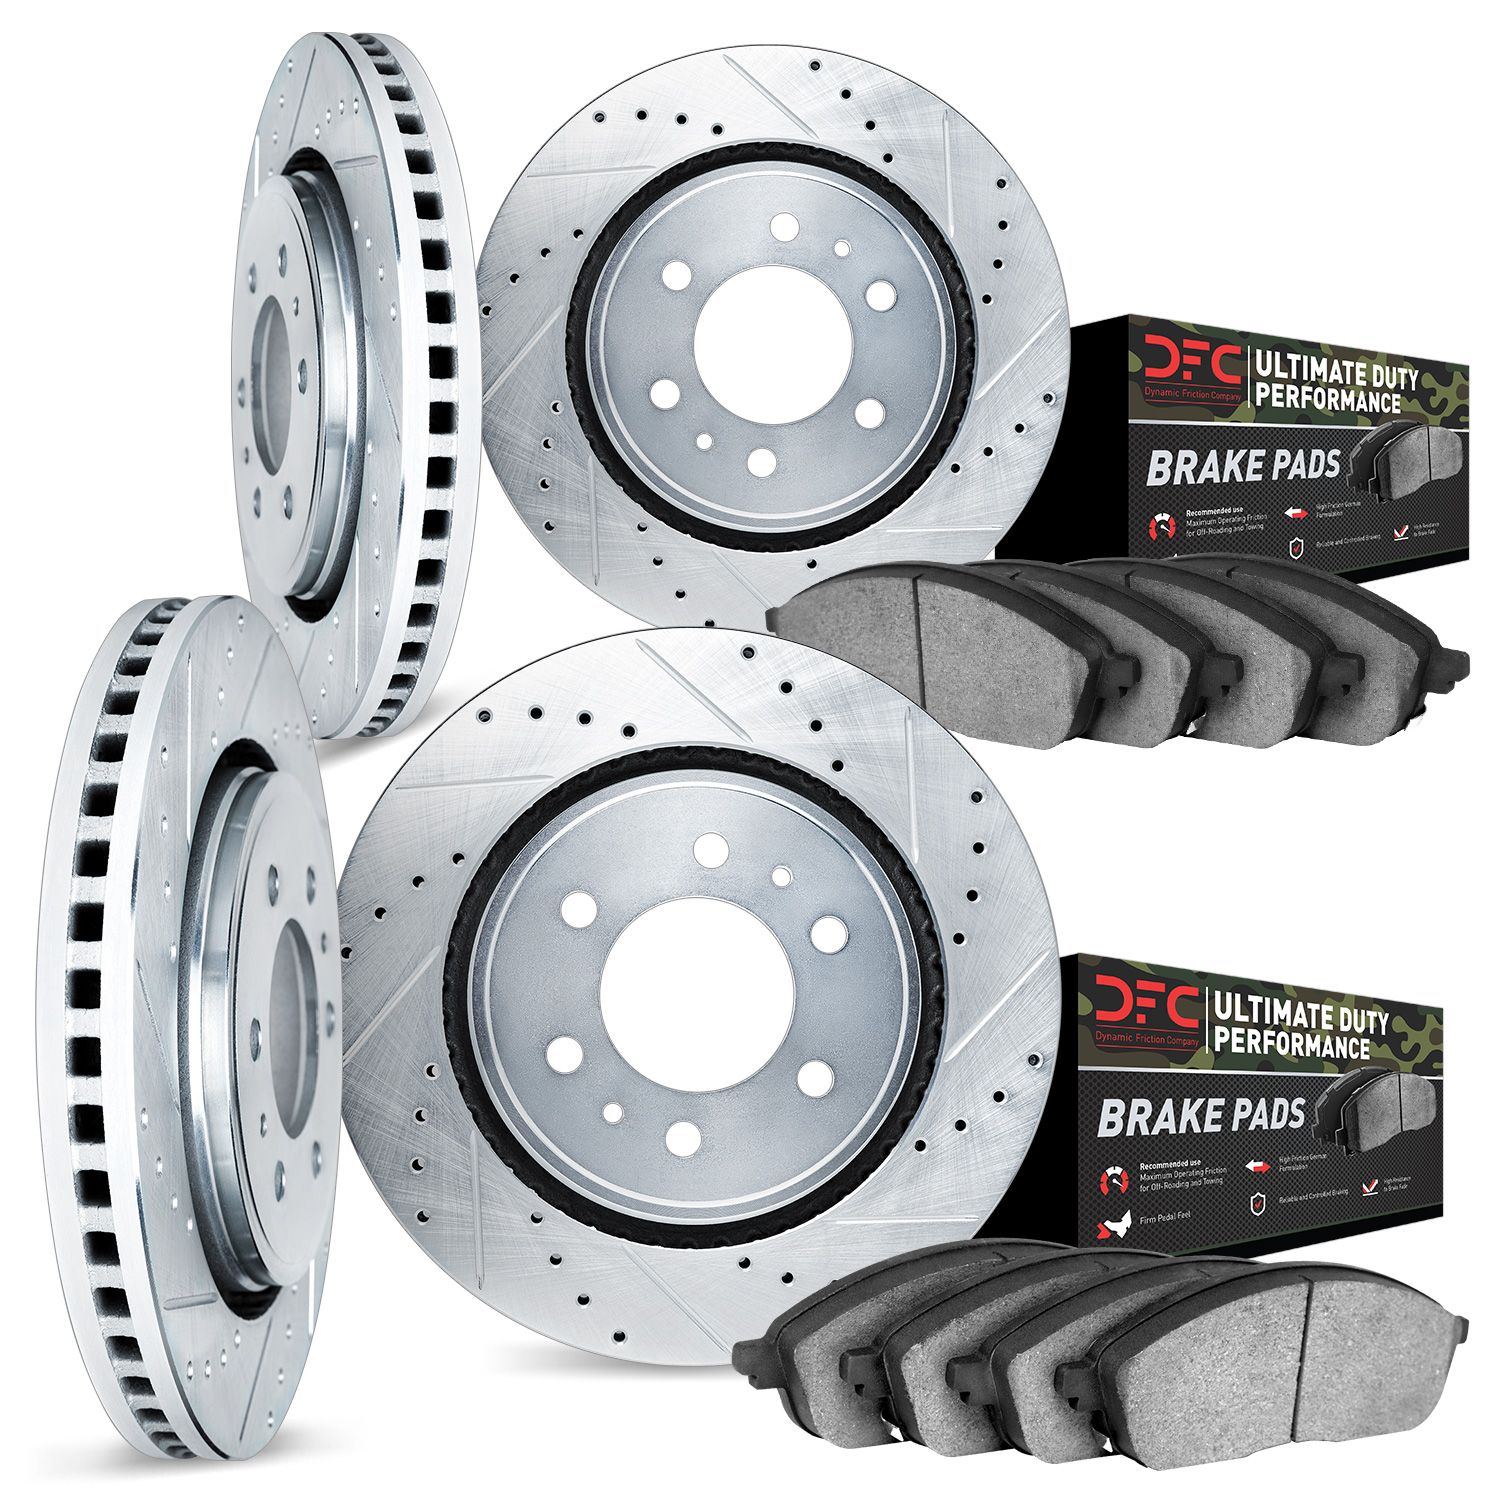 7404-40005 Drilled/Slotted Brake Rotors with Ultimate-Duty Brake Pads Kit [Silver], 2003-2003 Mopar, Position: Front and Rear